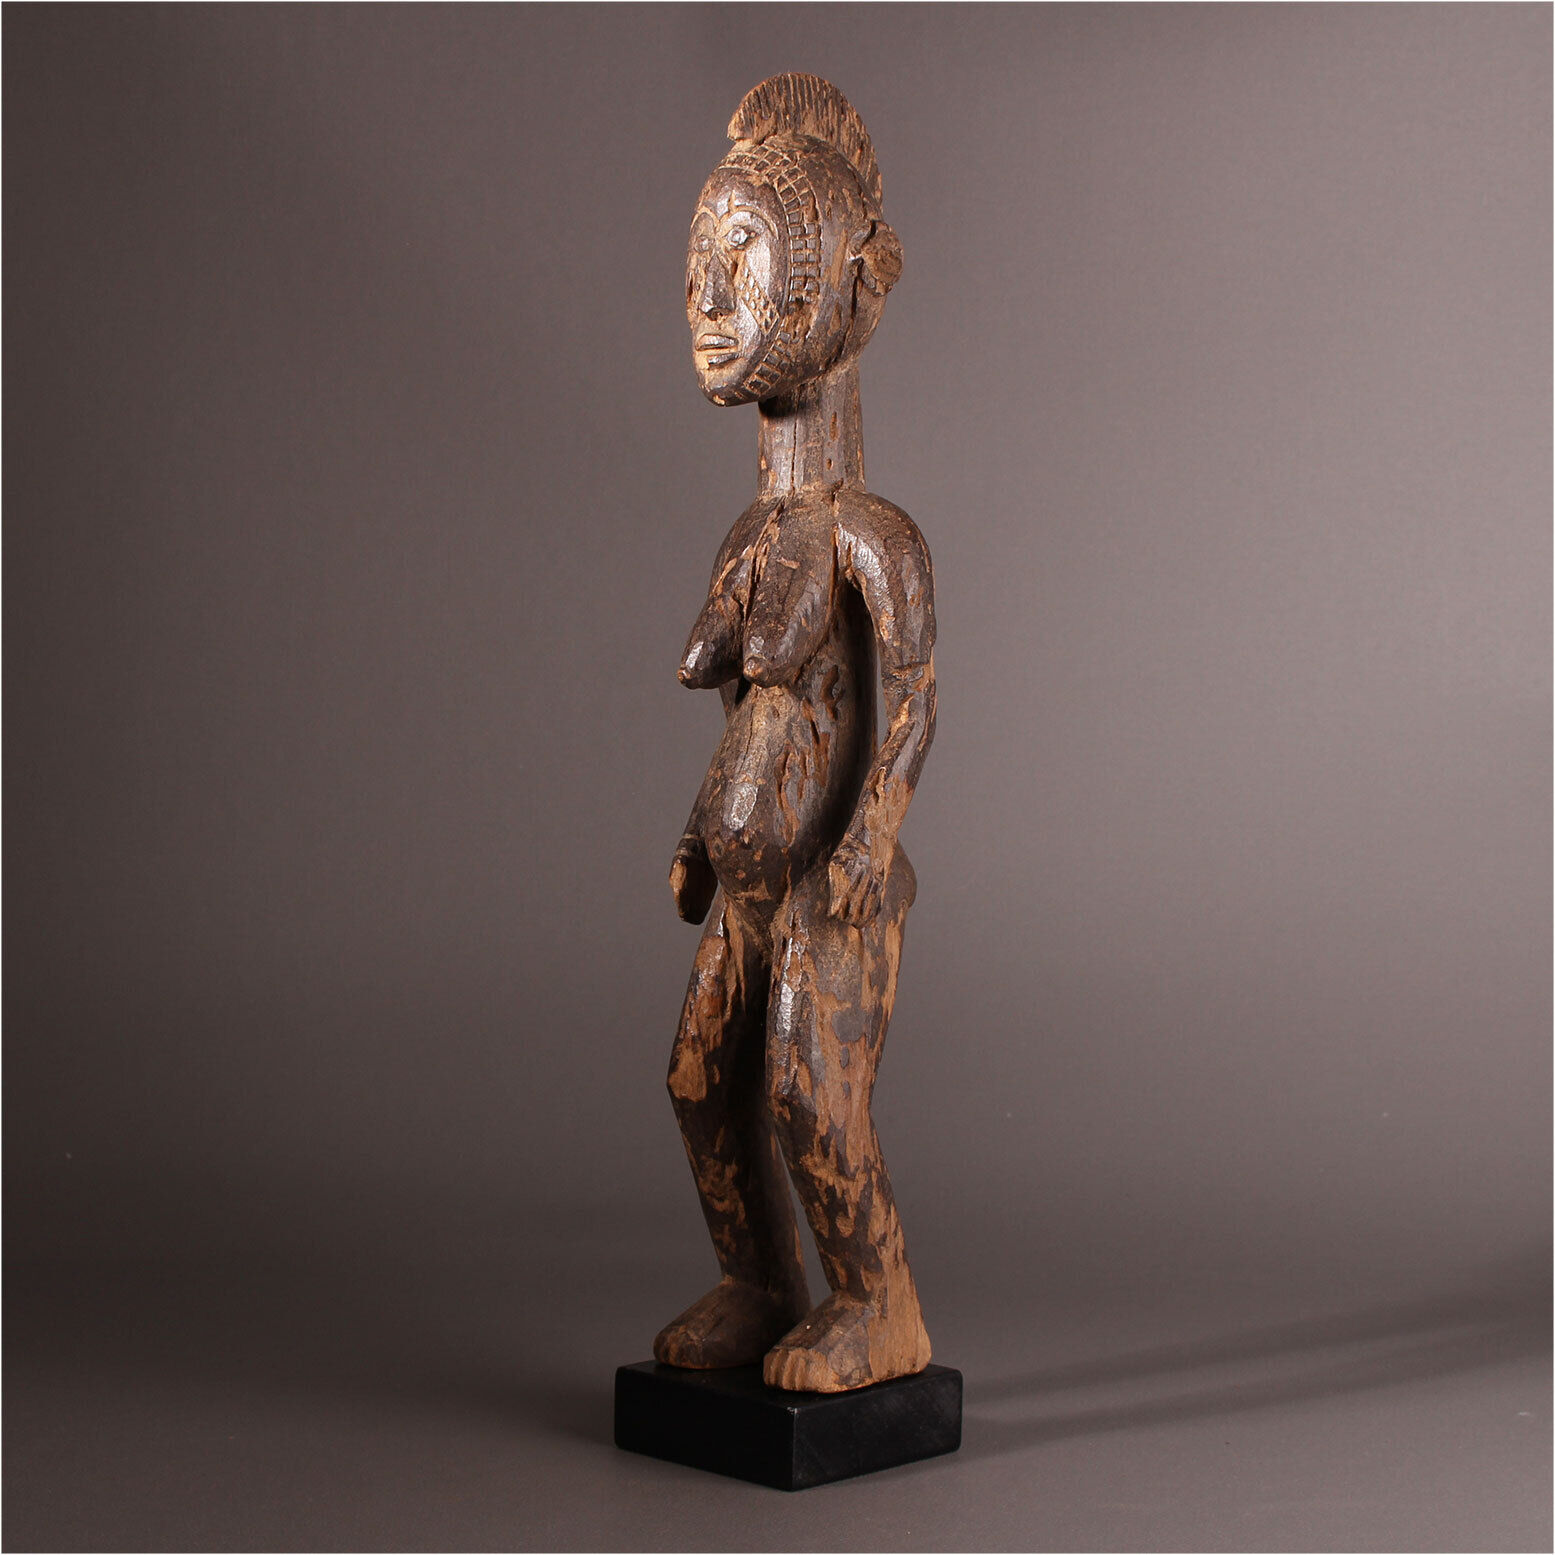 12225 Fine Mossi Figure With Typical Stammesnarben Wooden Base